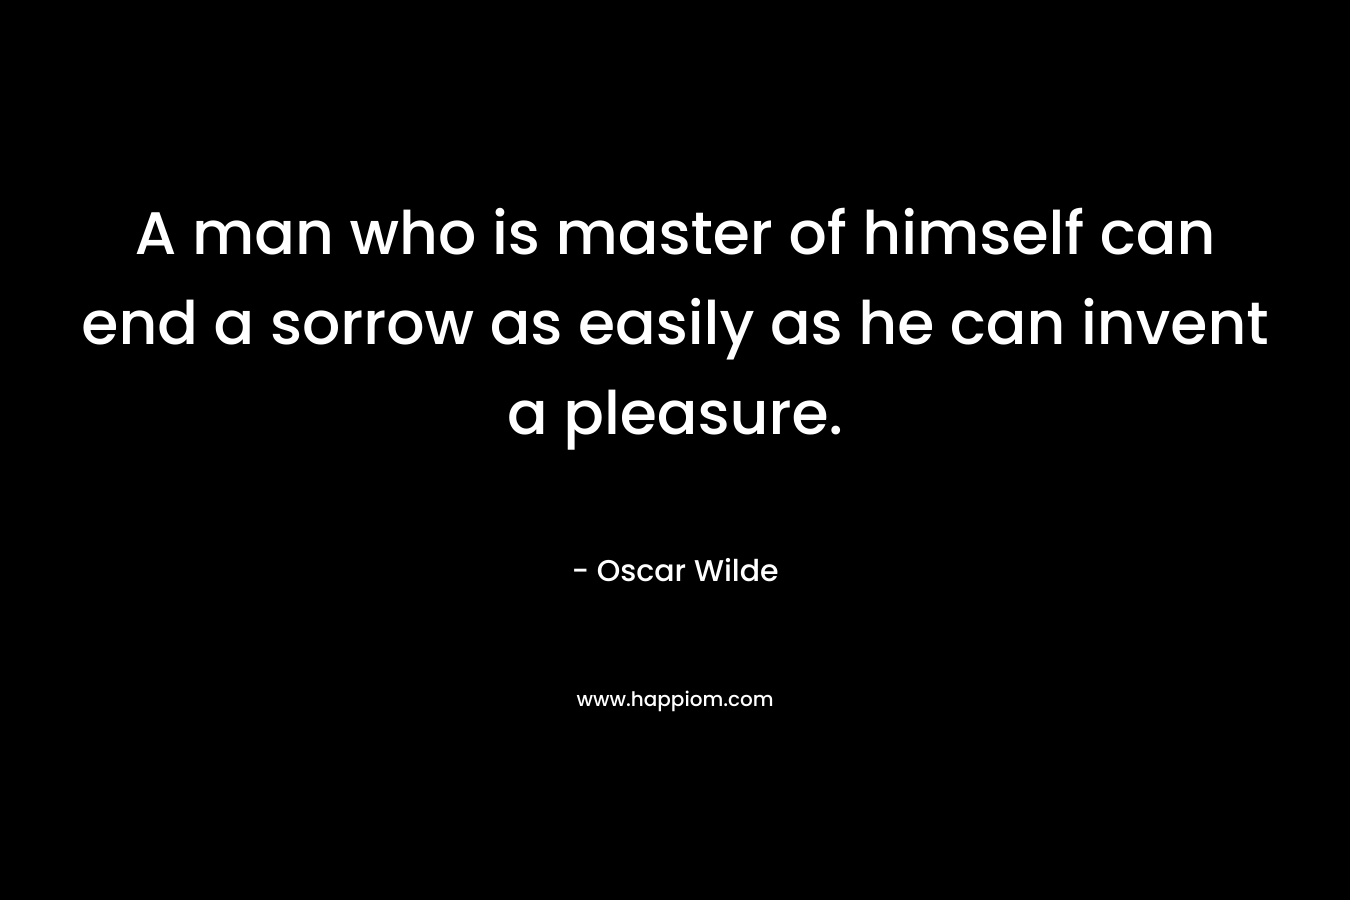 A man who is master of himself can end a sorrow as easily as he can invent a pleasure.